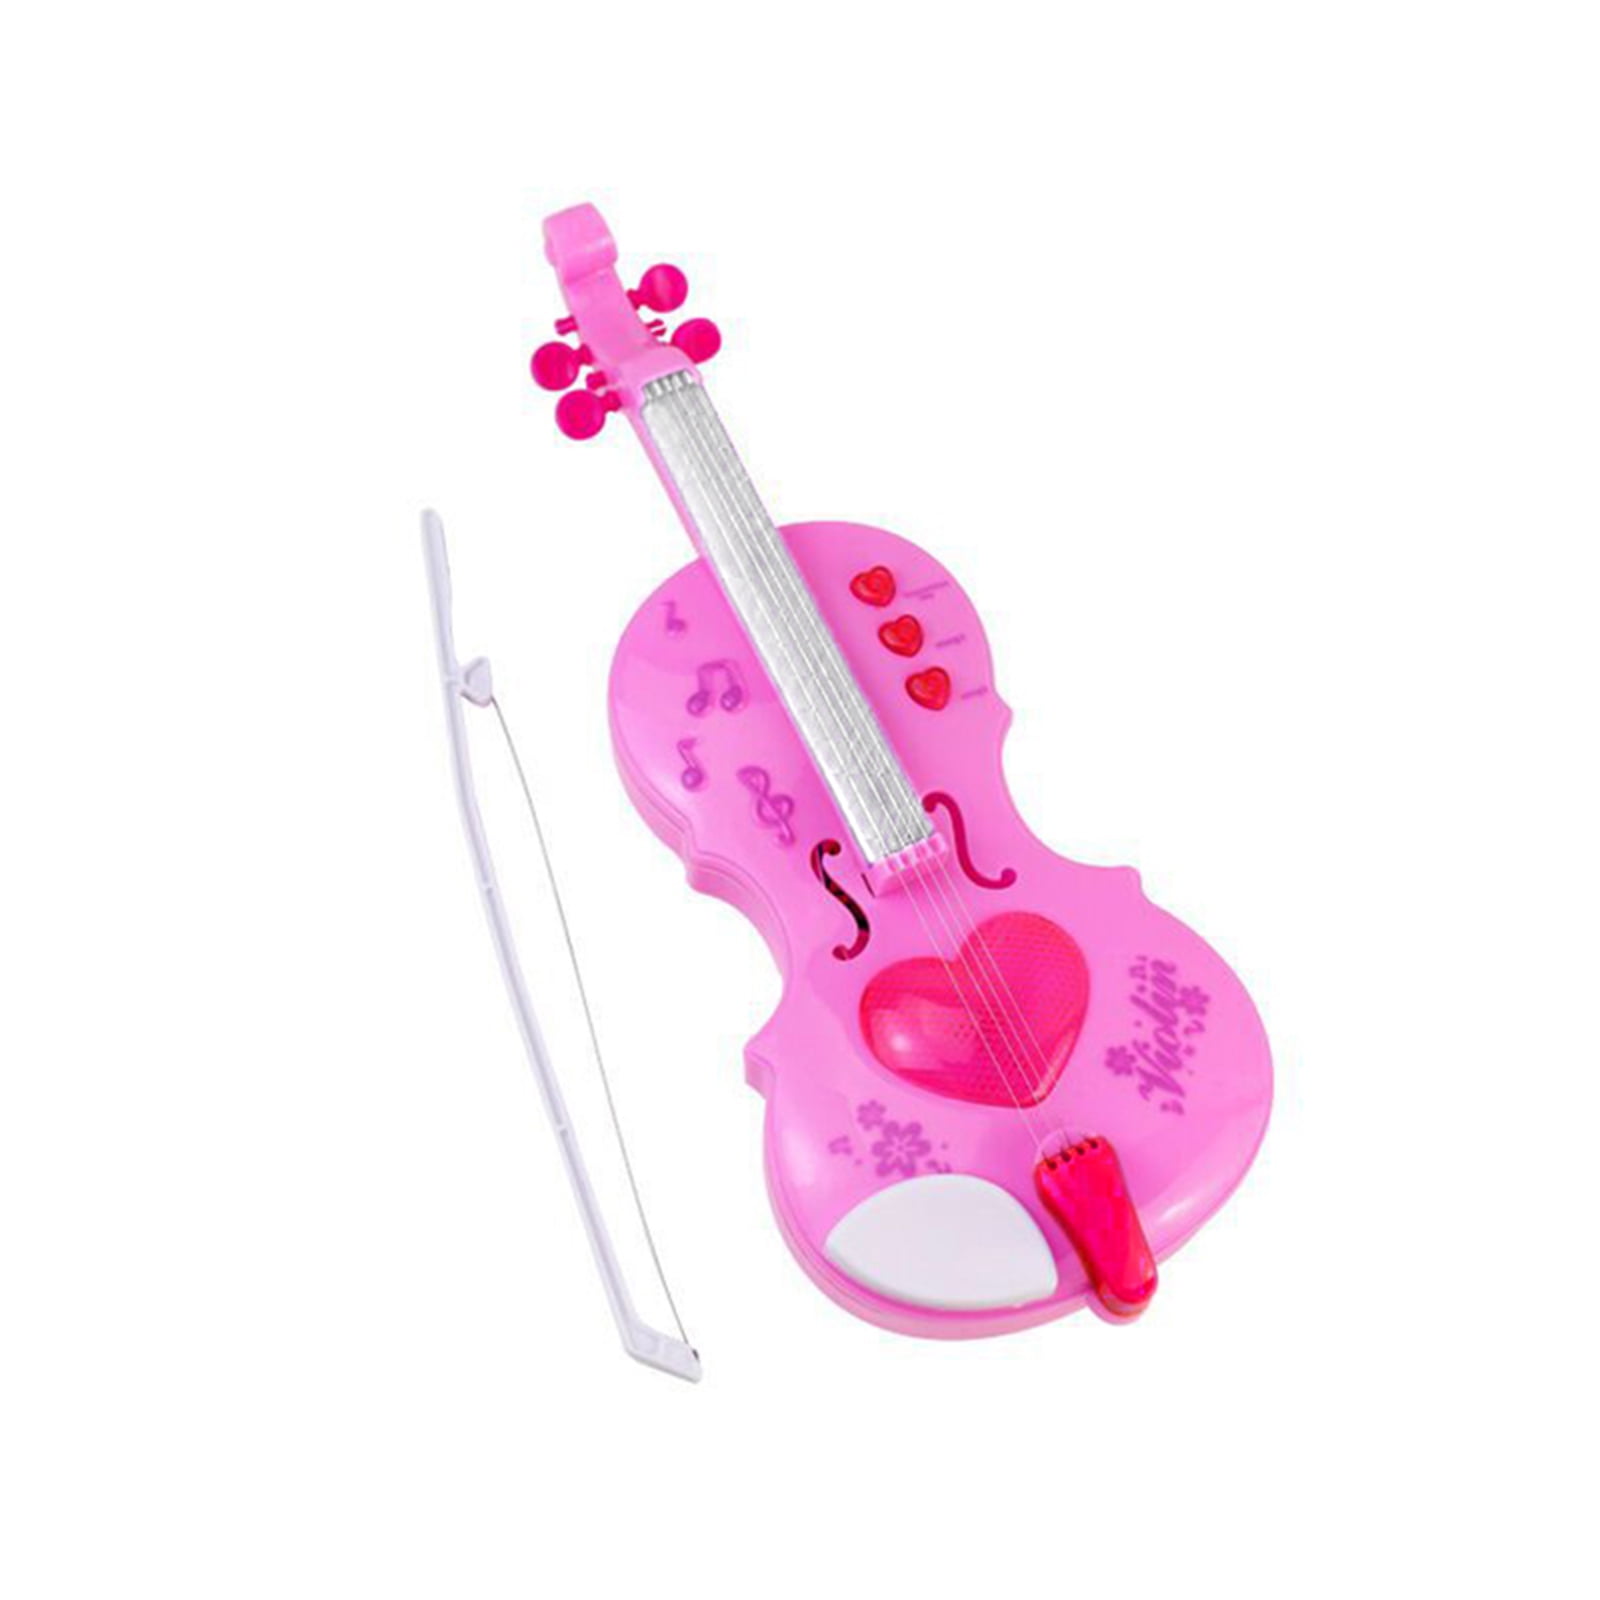 Kid Stimulation Toys Violin Demo Educational Musical Instrument Fiddle Brown 